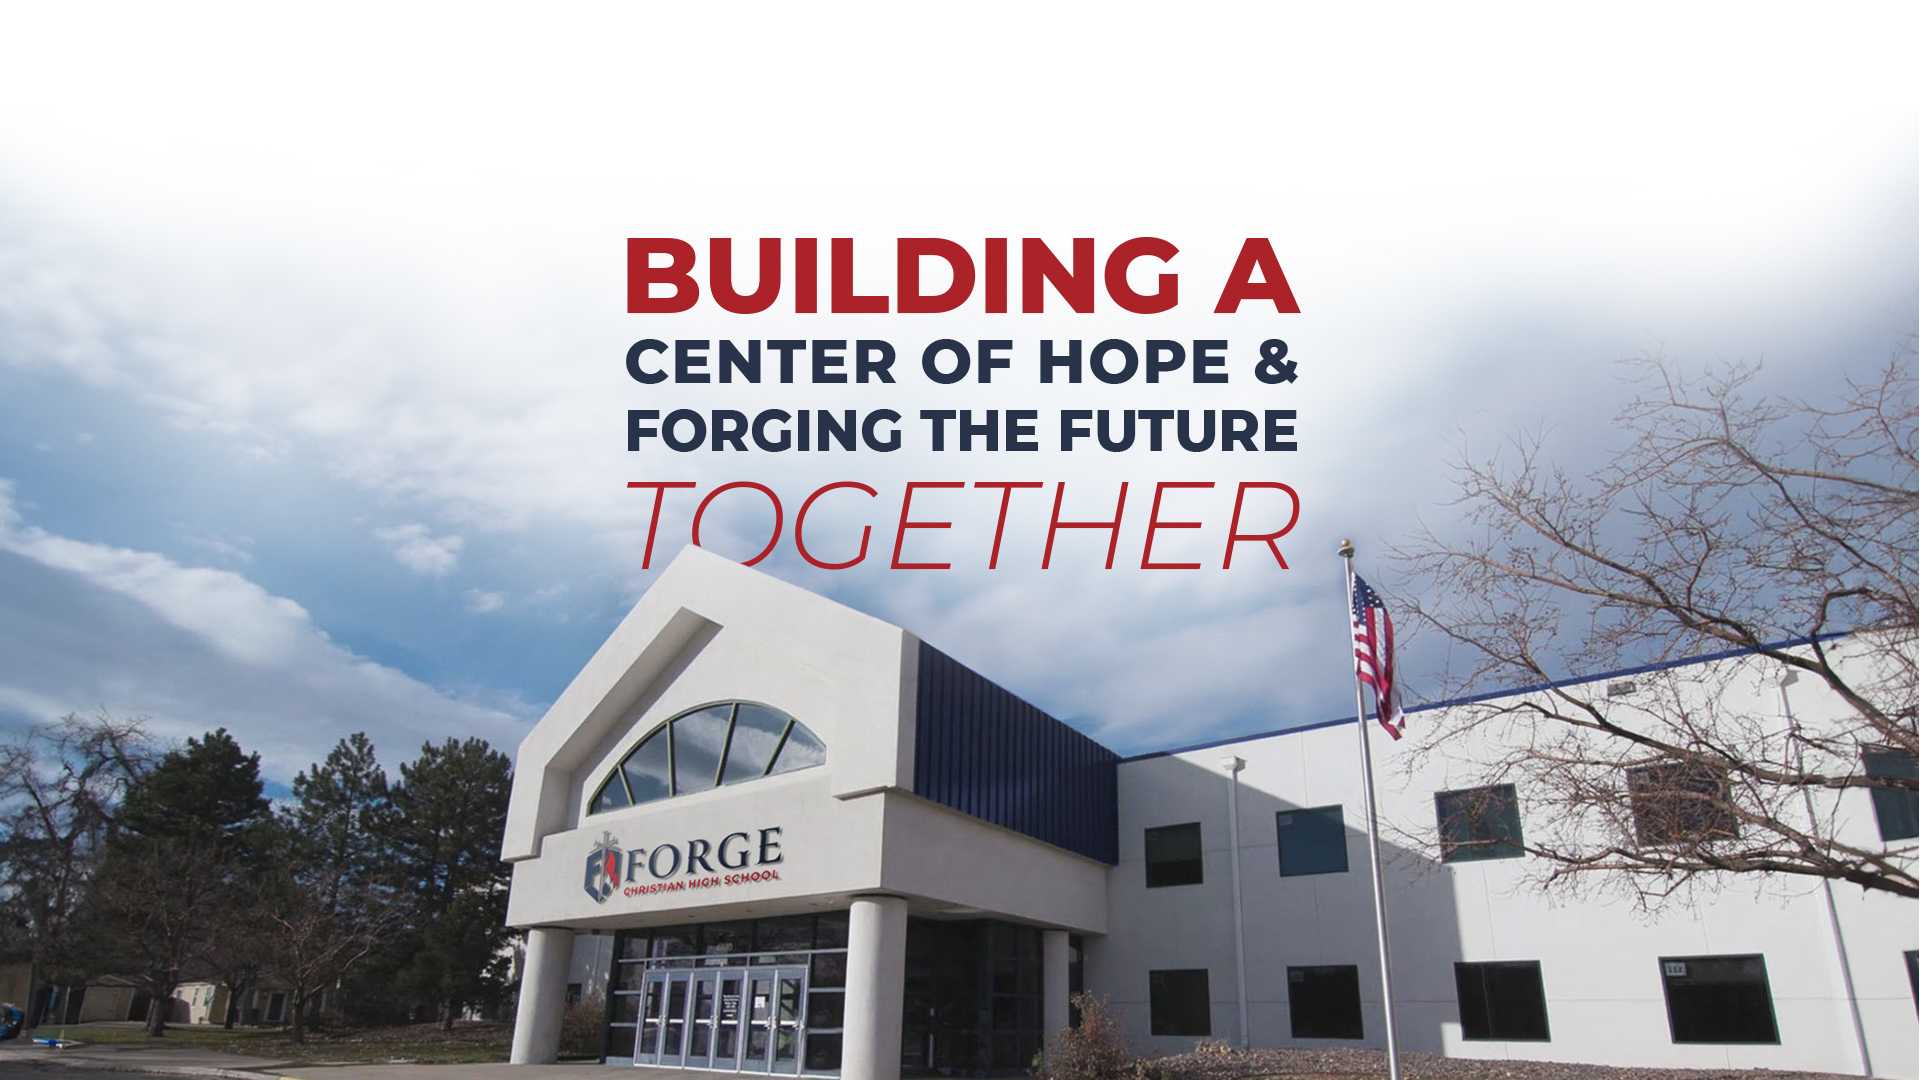 Center of Hope | Phase II

Building Campaign
